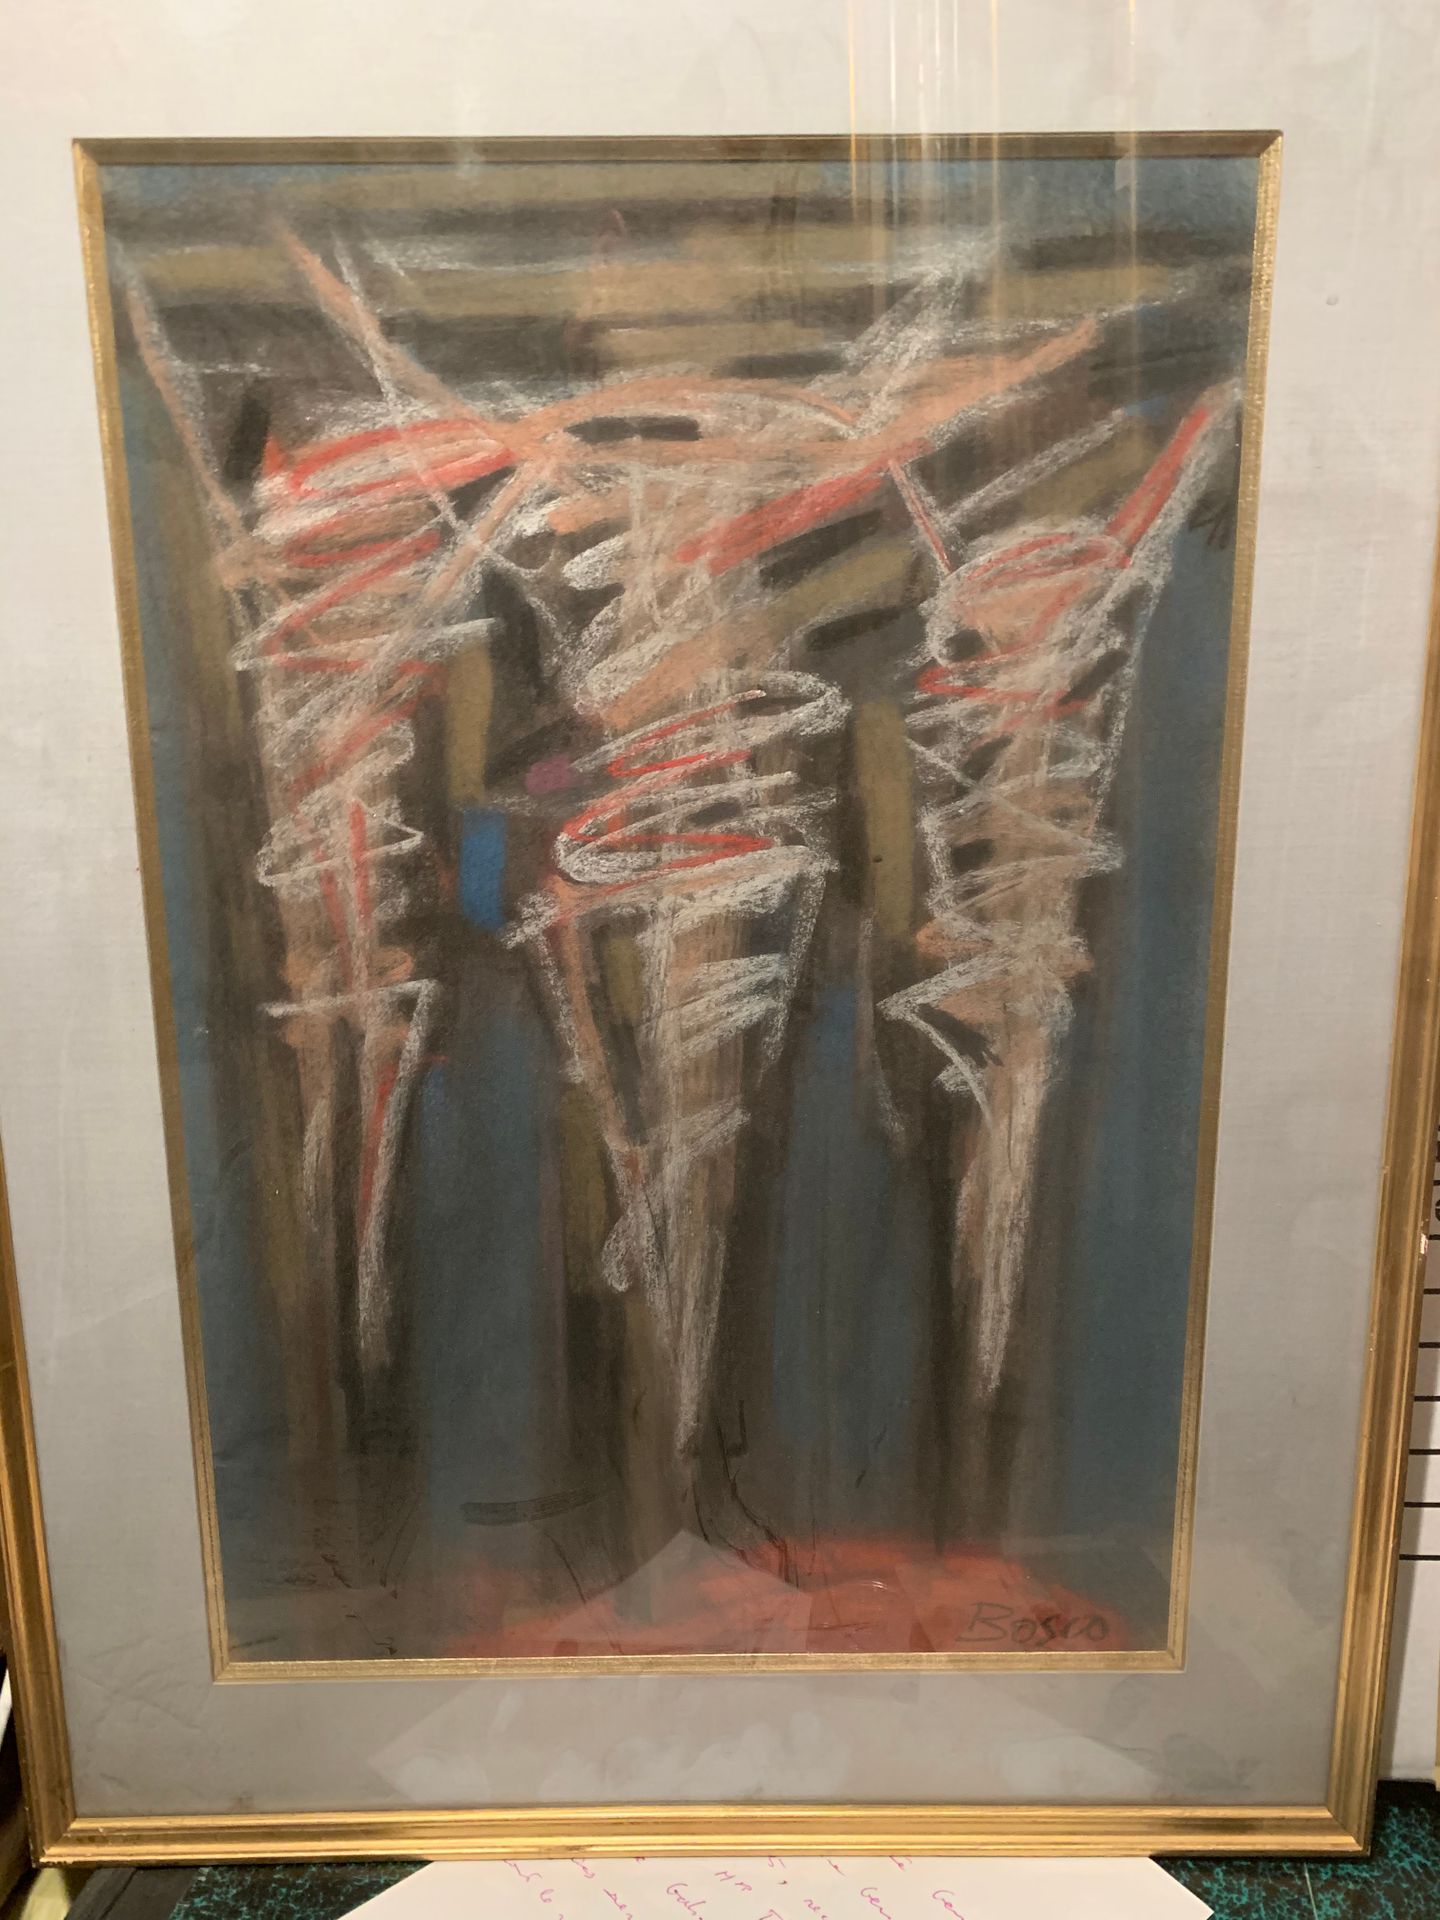 Null Pierre BOSCO (1909-1993)

Calvary

Pastel signed lower right